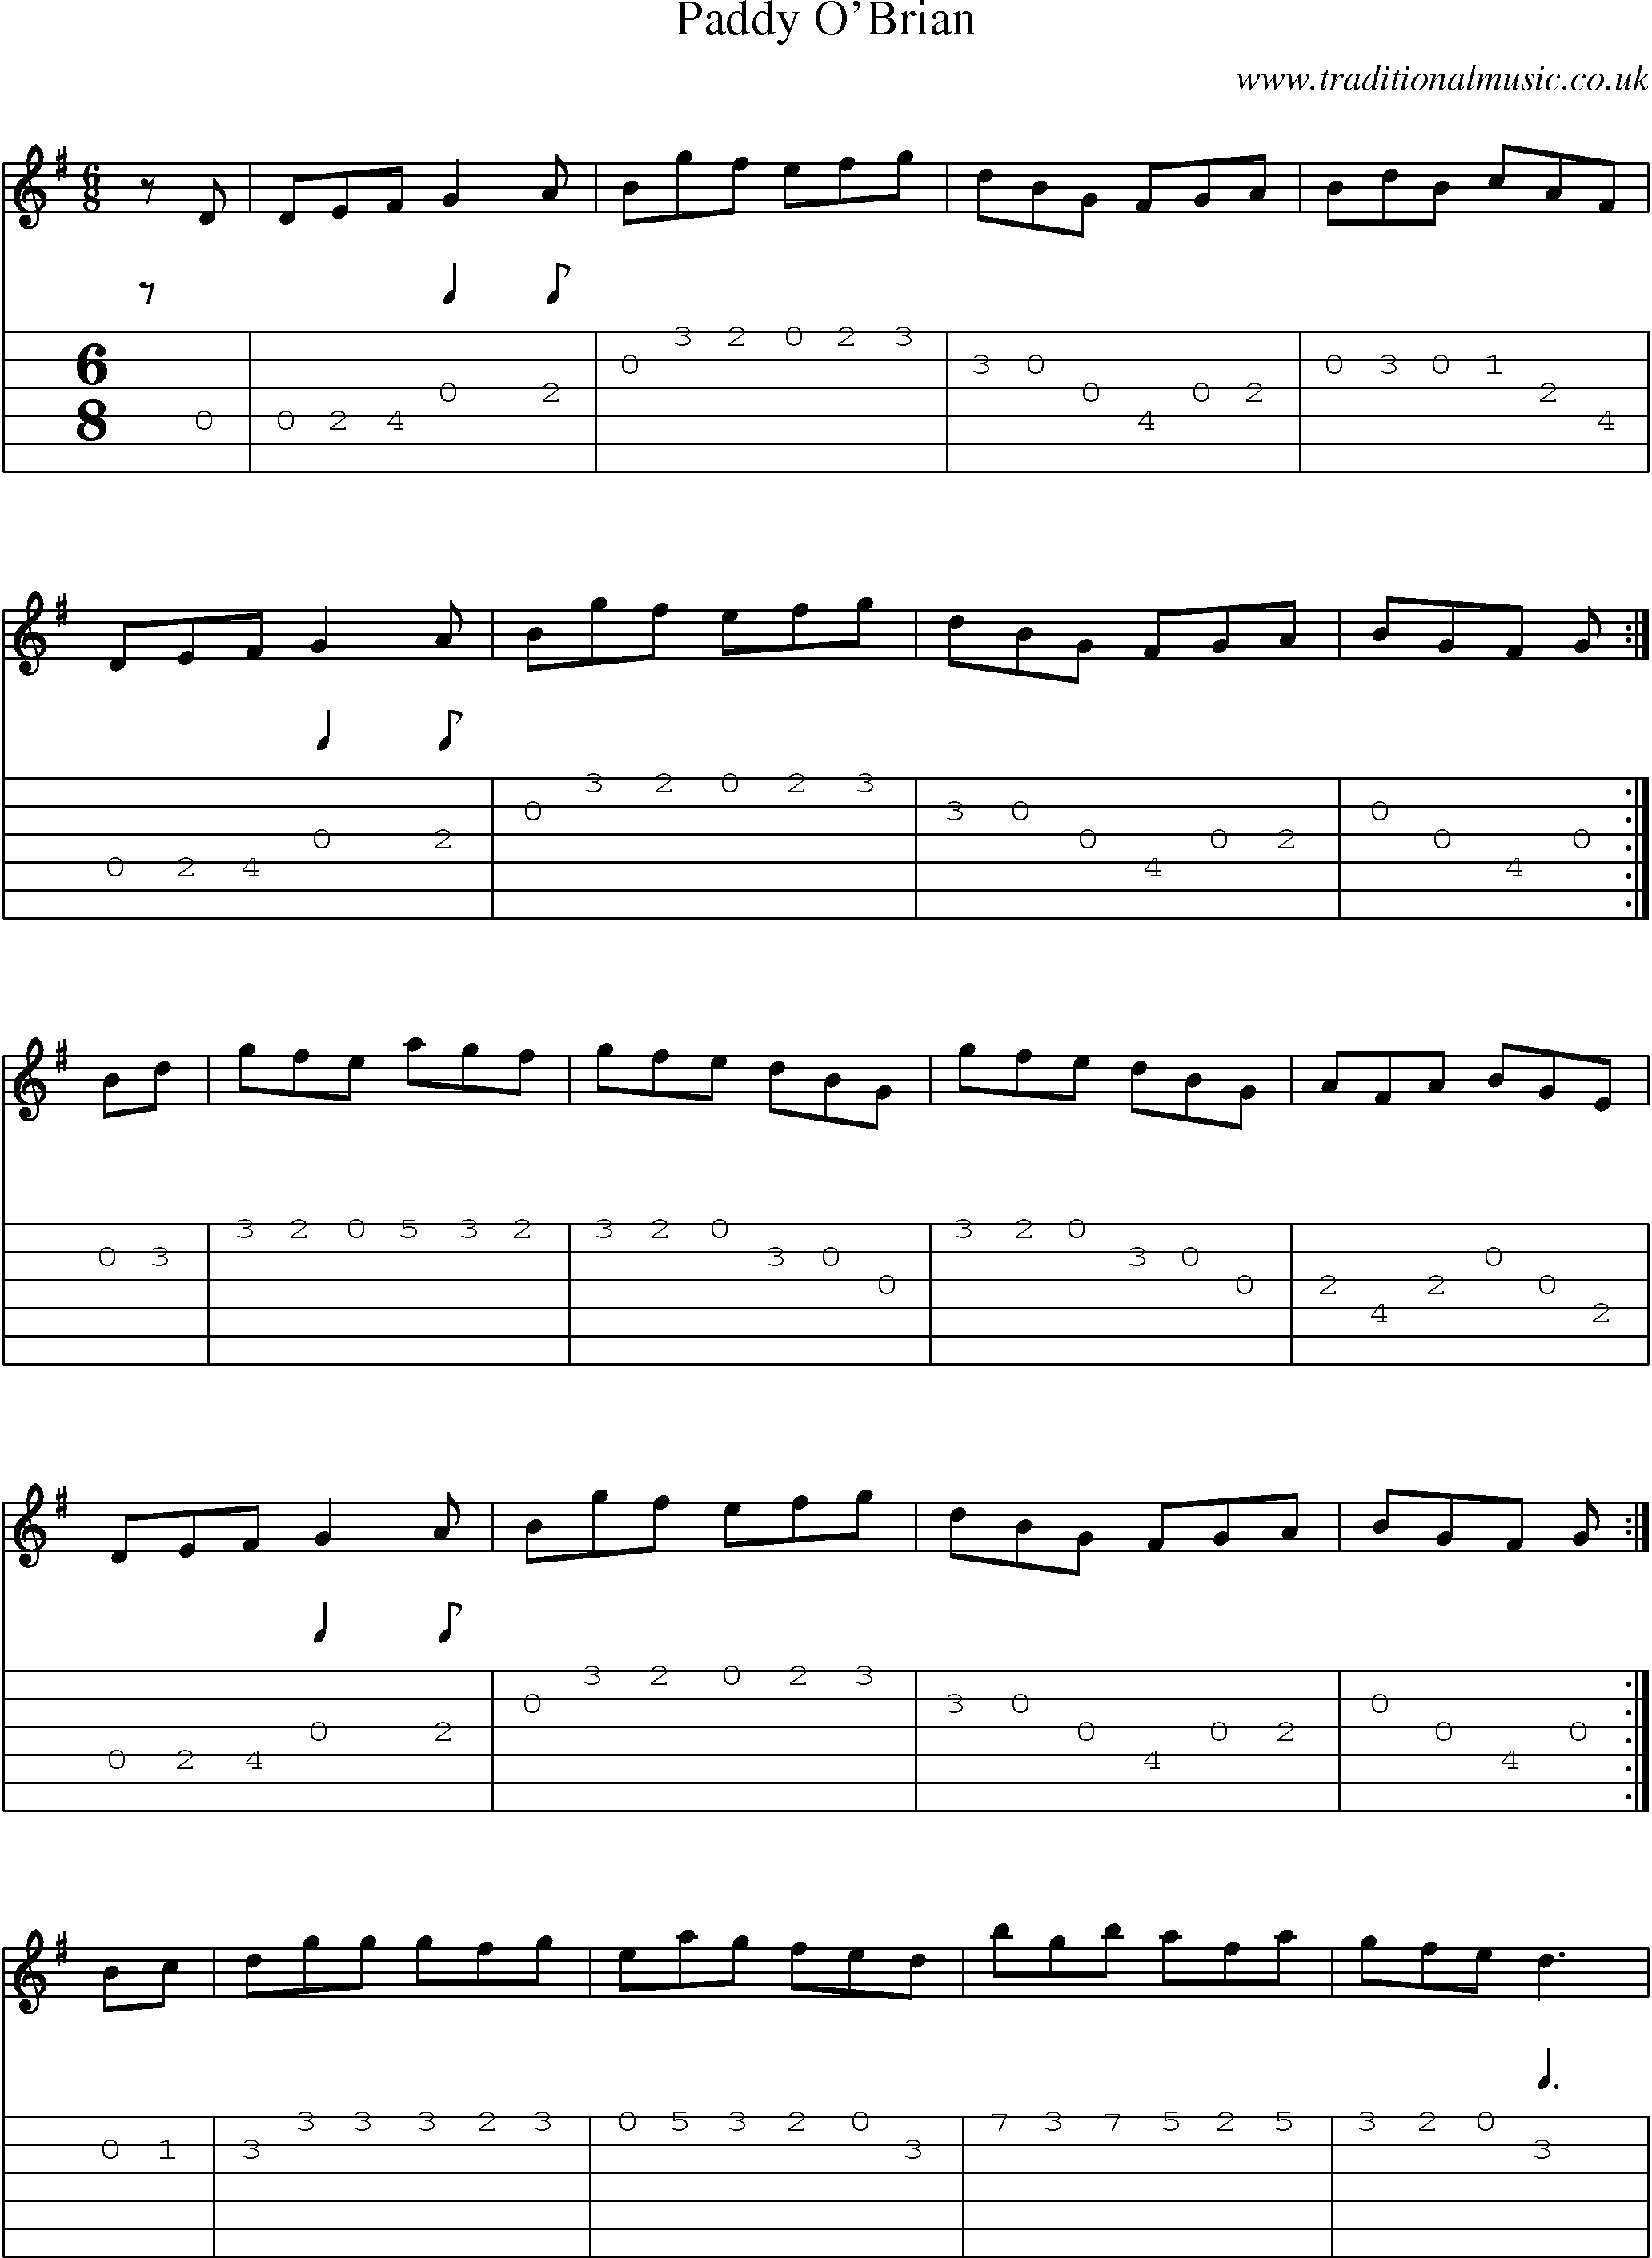 Music Score and Guitar Tabs for Paddy Obrian